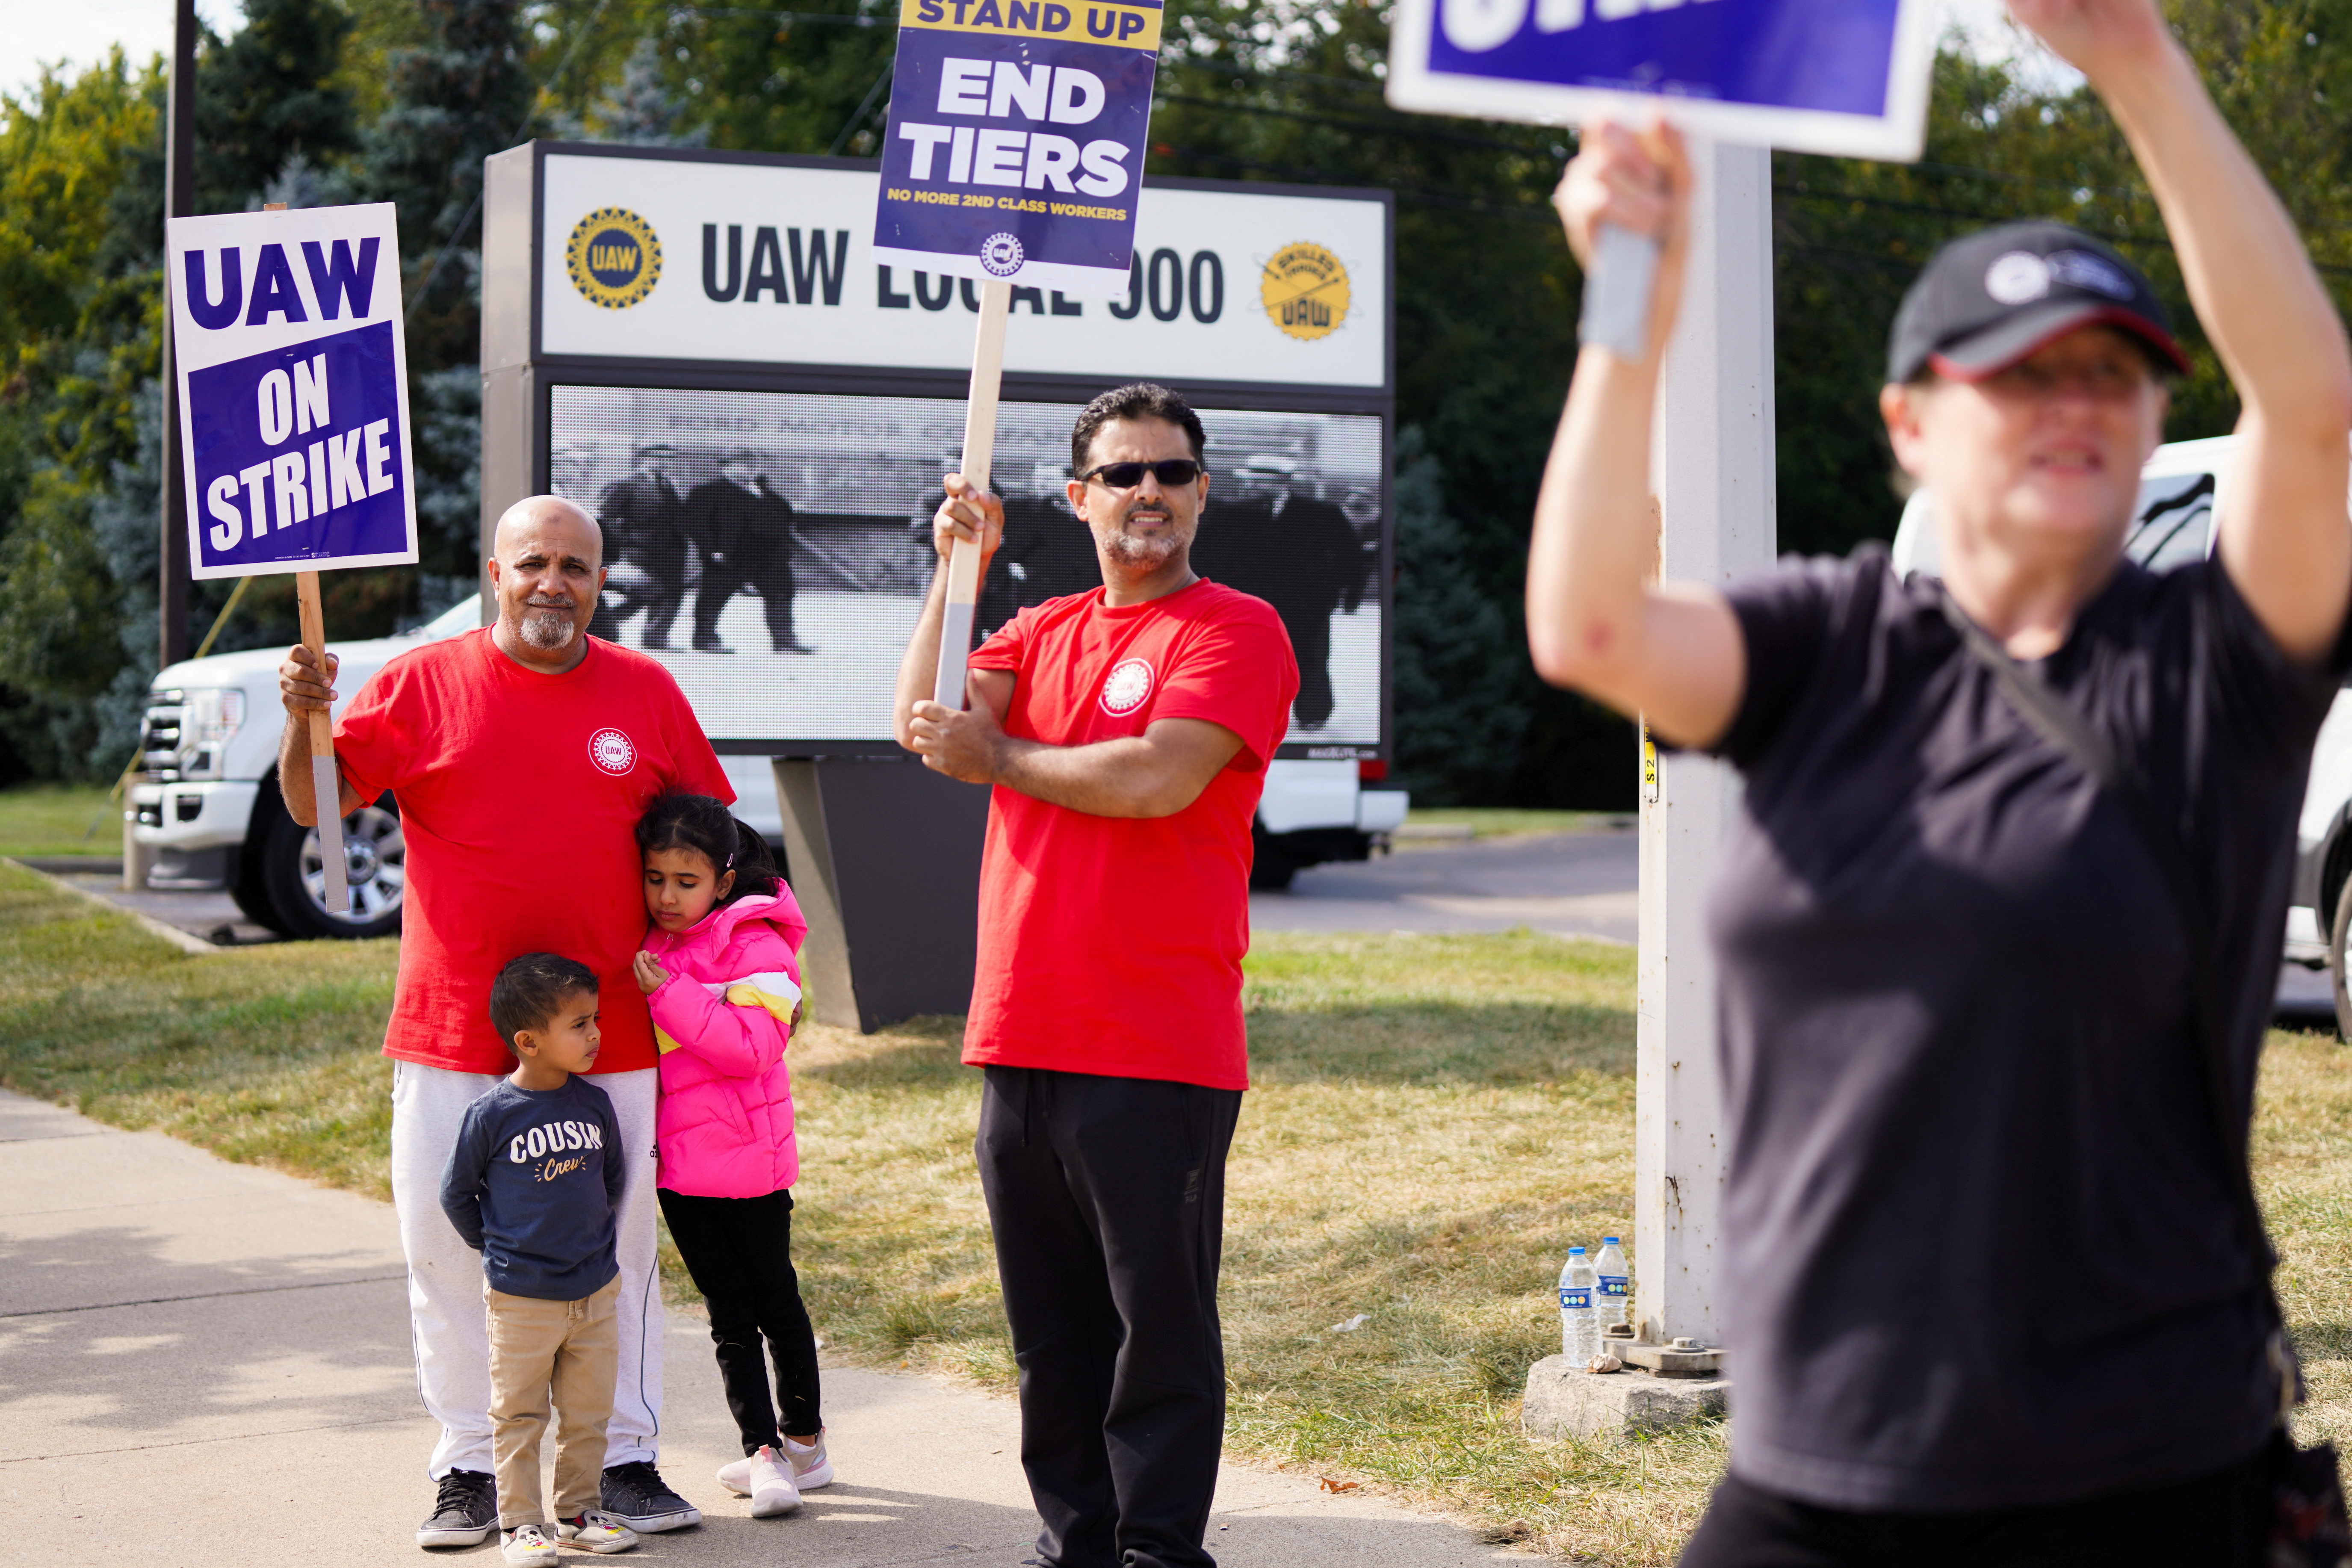 GM, Stellantis dealers and customers face dwindling parts as UAW strike  expands